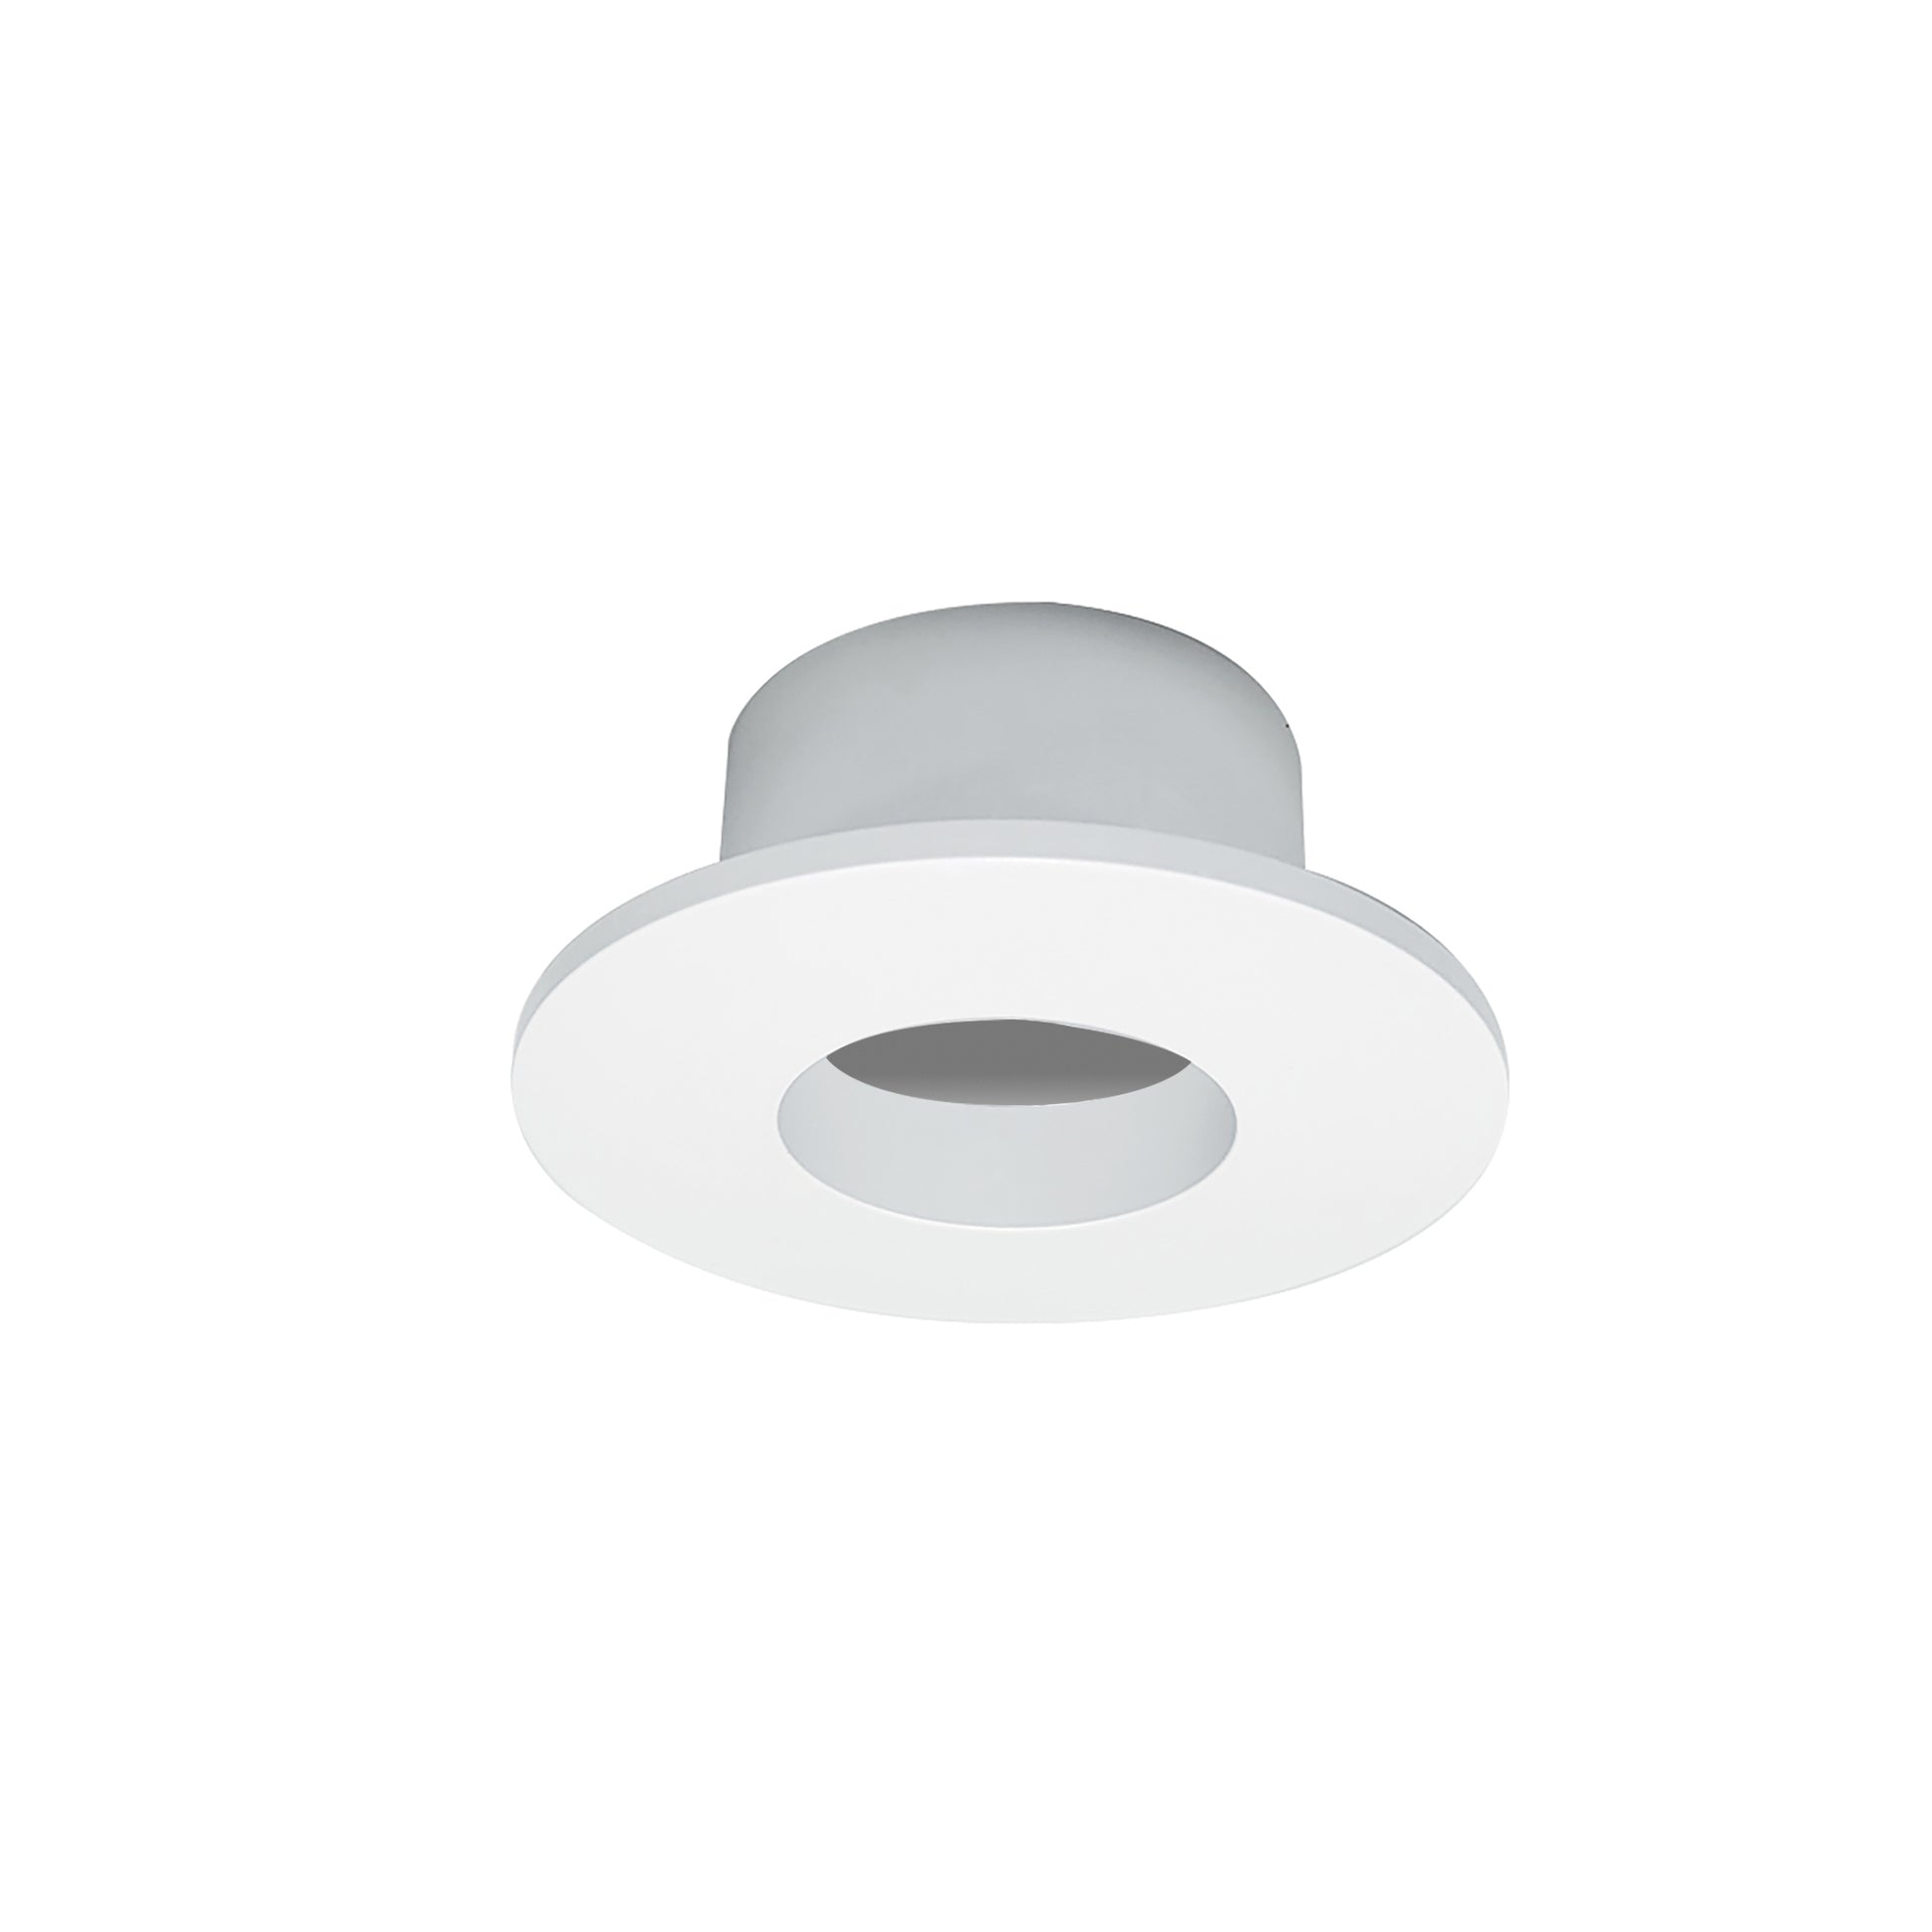 1-Inch Nora Lighting Iolite LED Recessed Downlight Trim -  Can-less Round Fixture